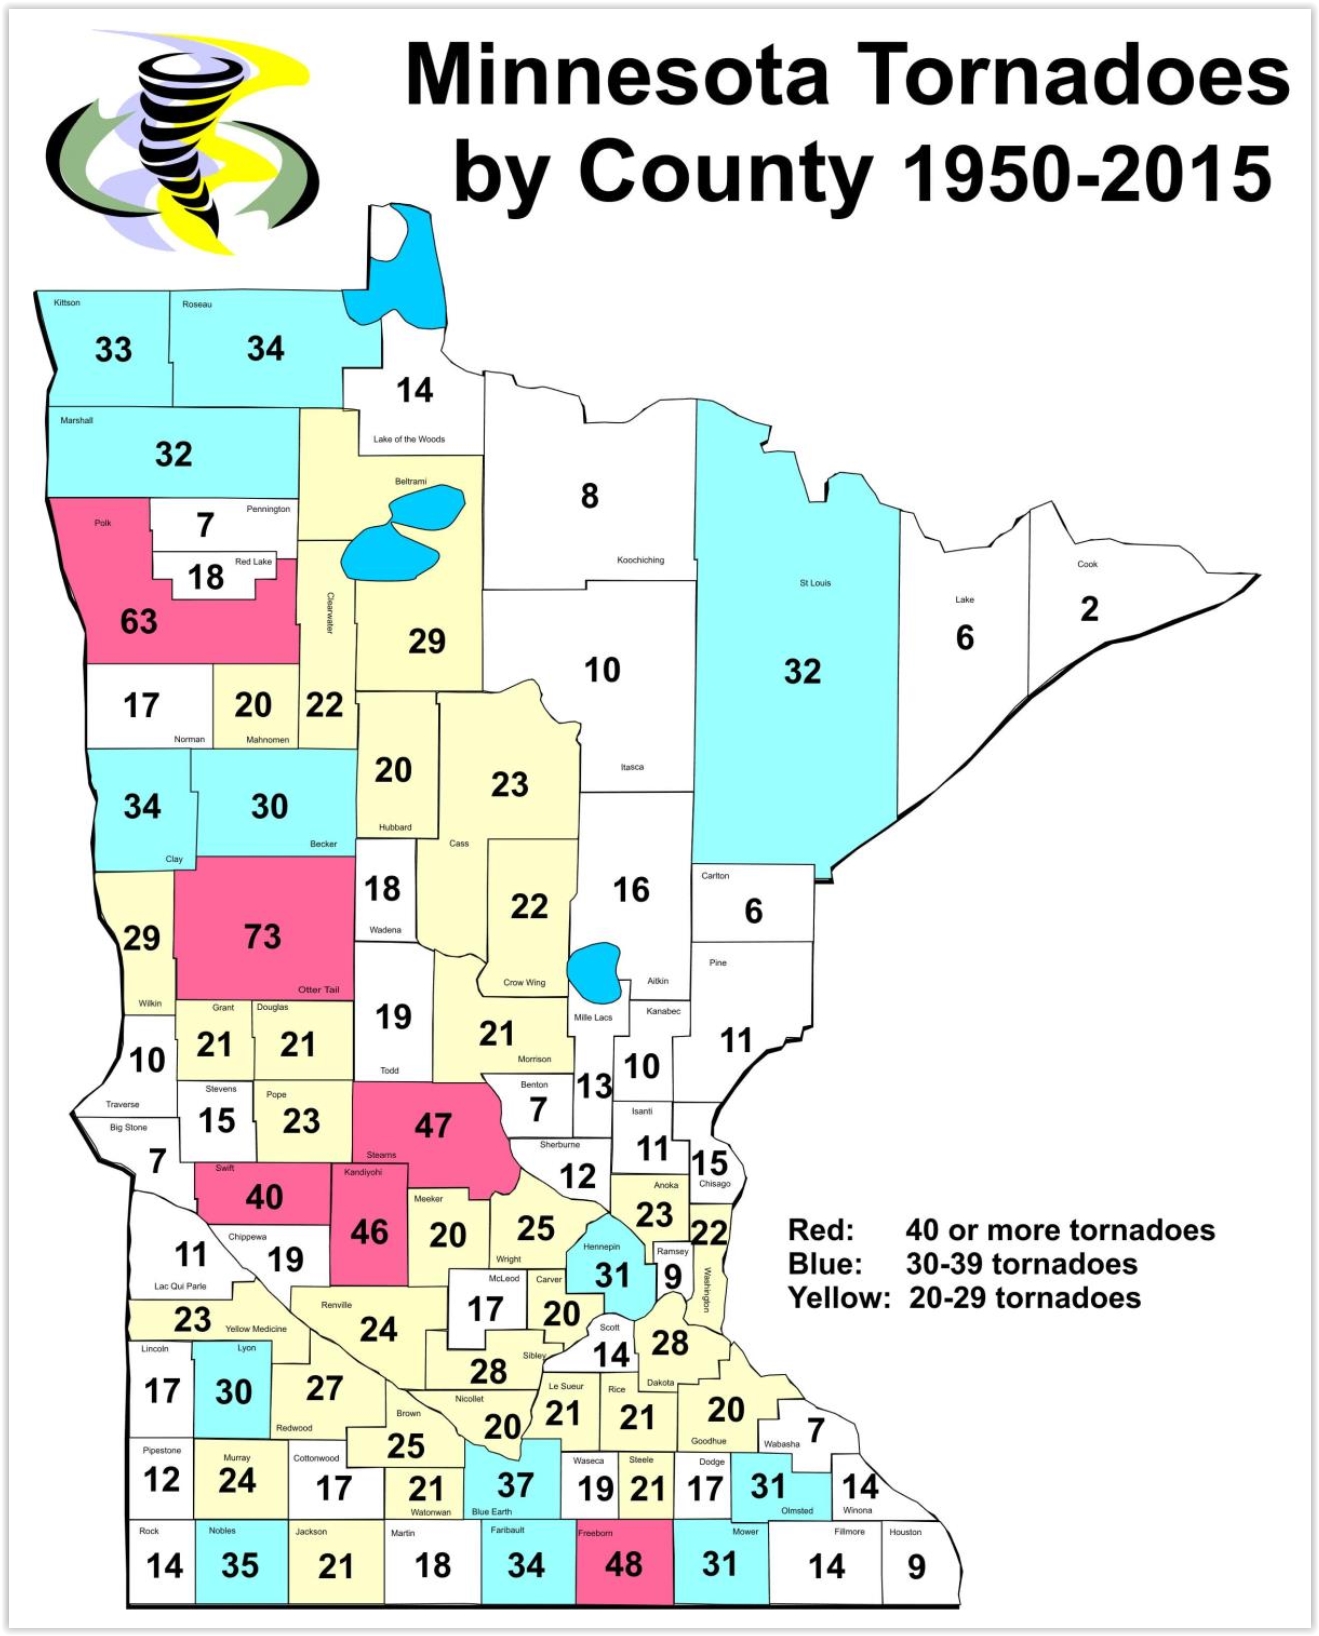 June Comes Early – Minnesota’s Safest County from Tornadoes?